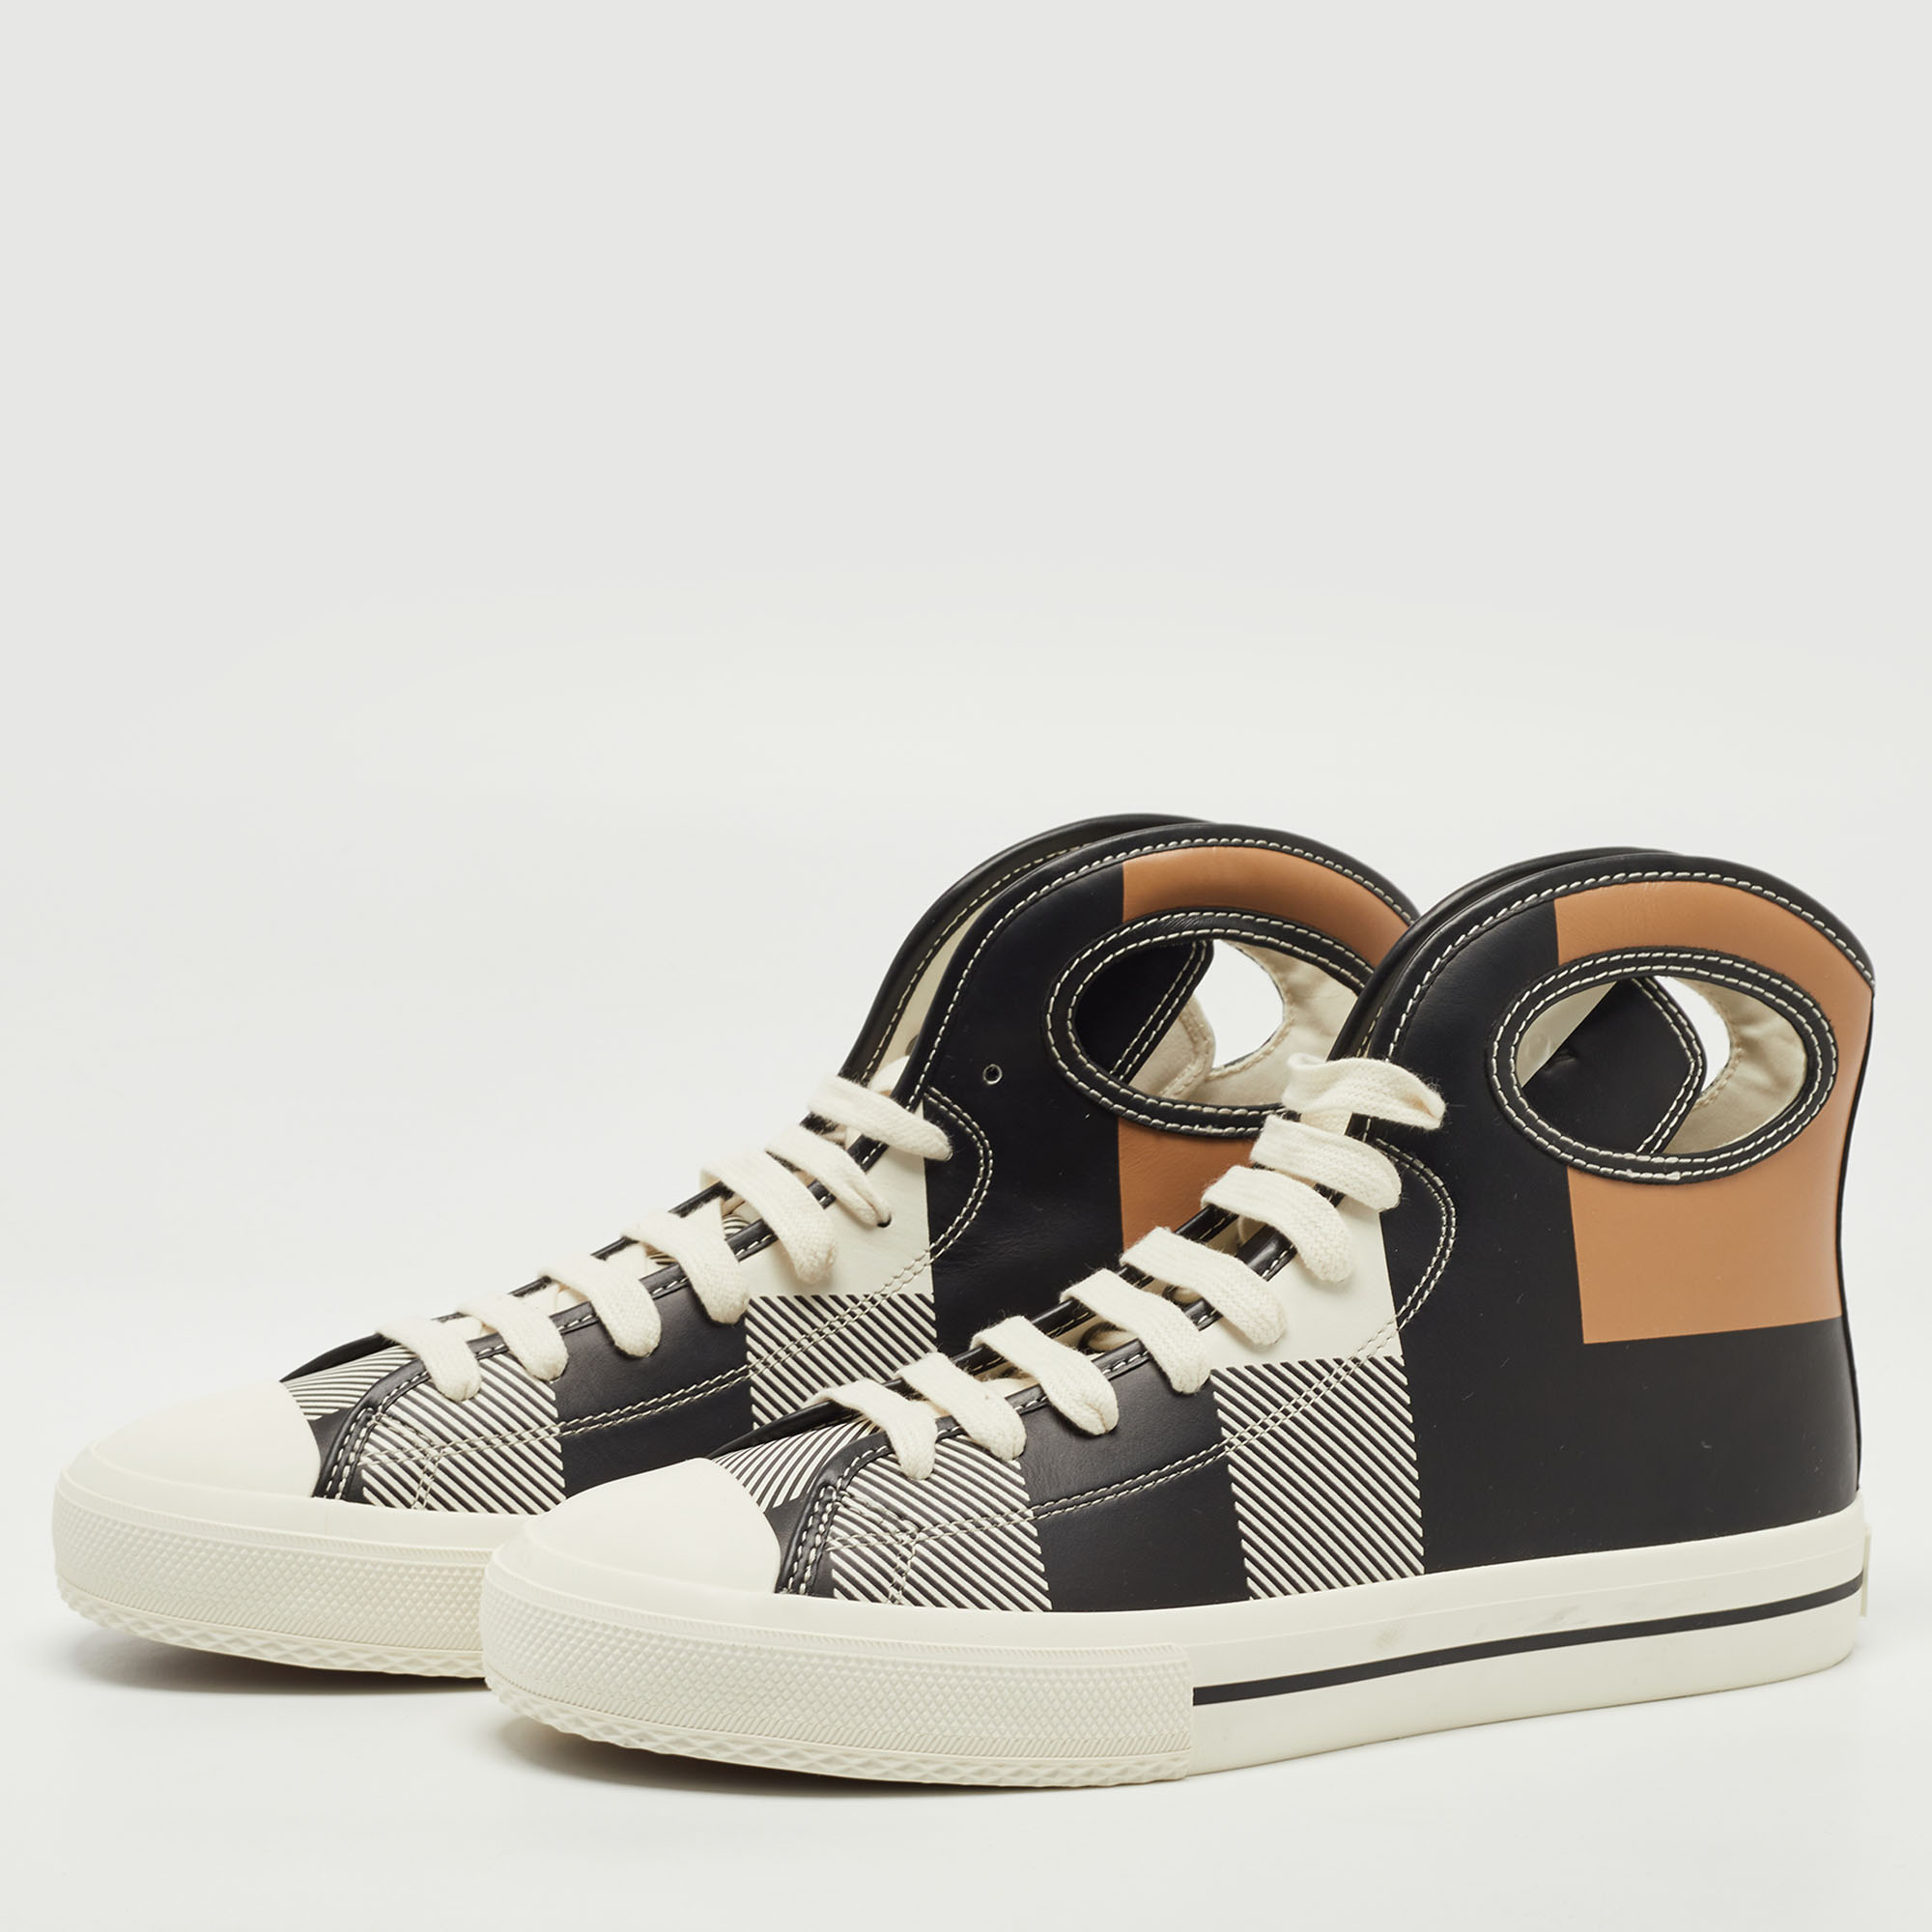 

Burberry Tricolor Leather Larkhall High Top Sneakers Size, Black